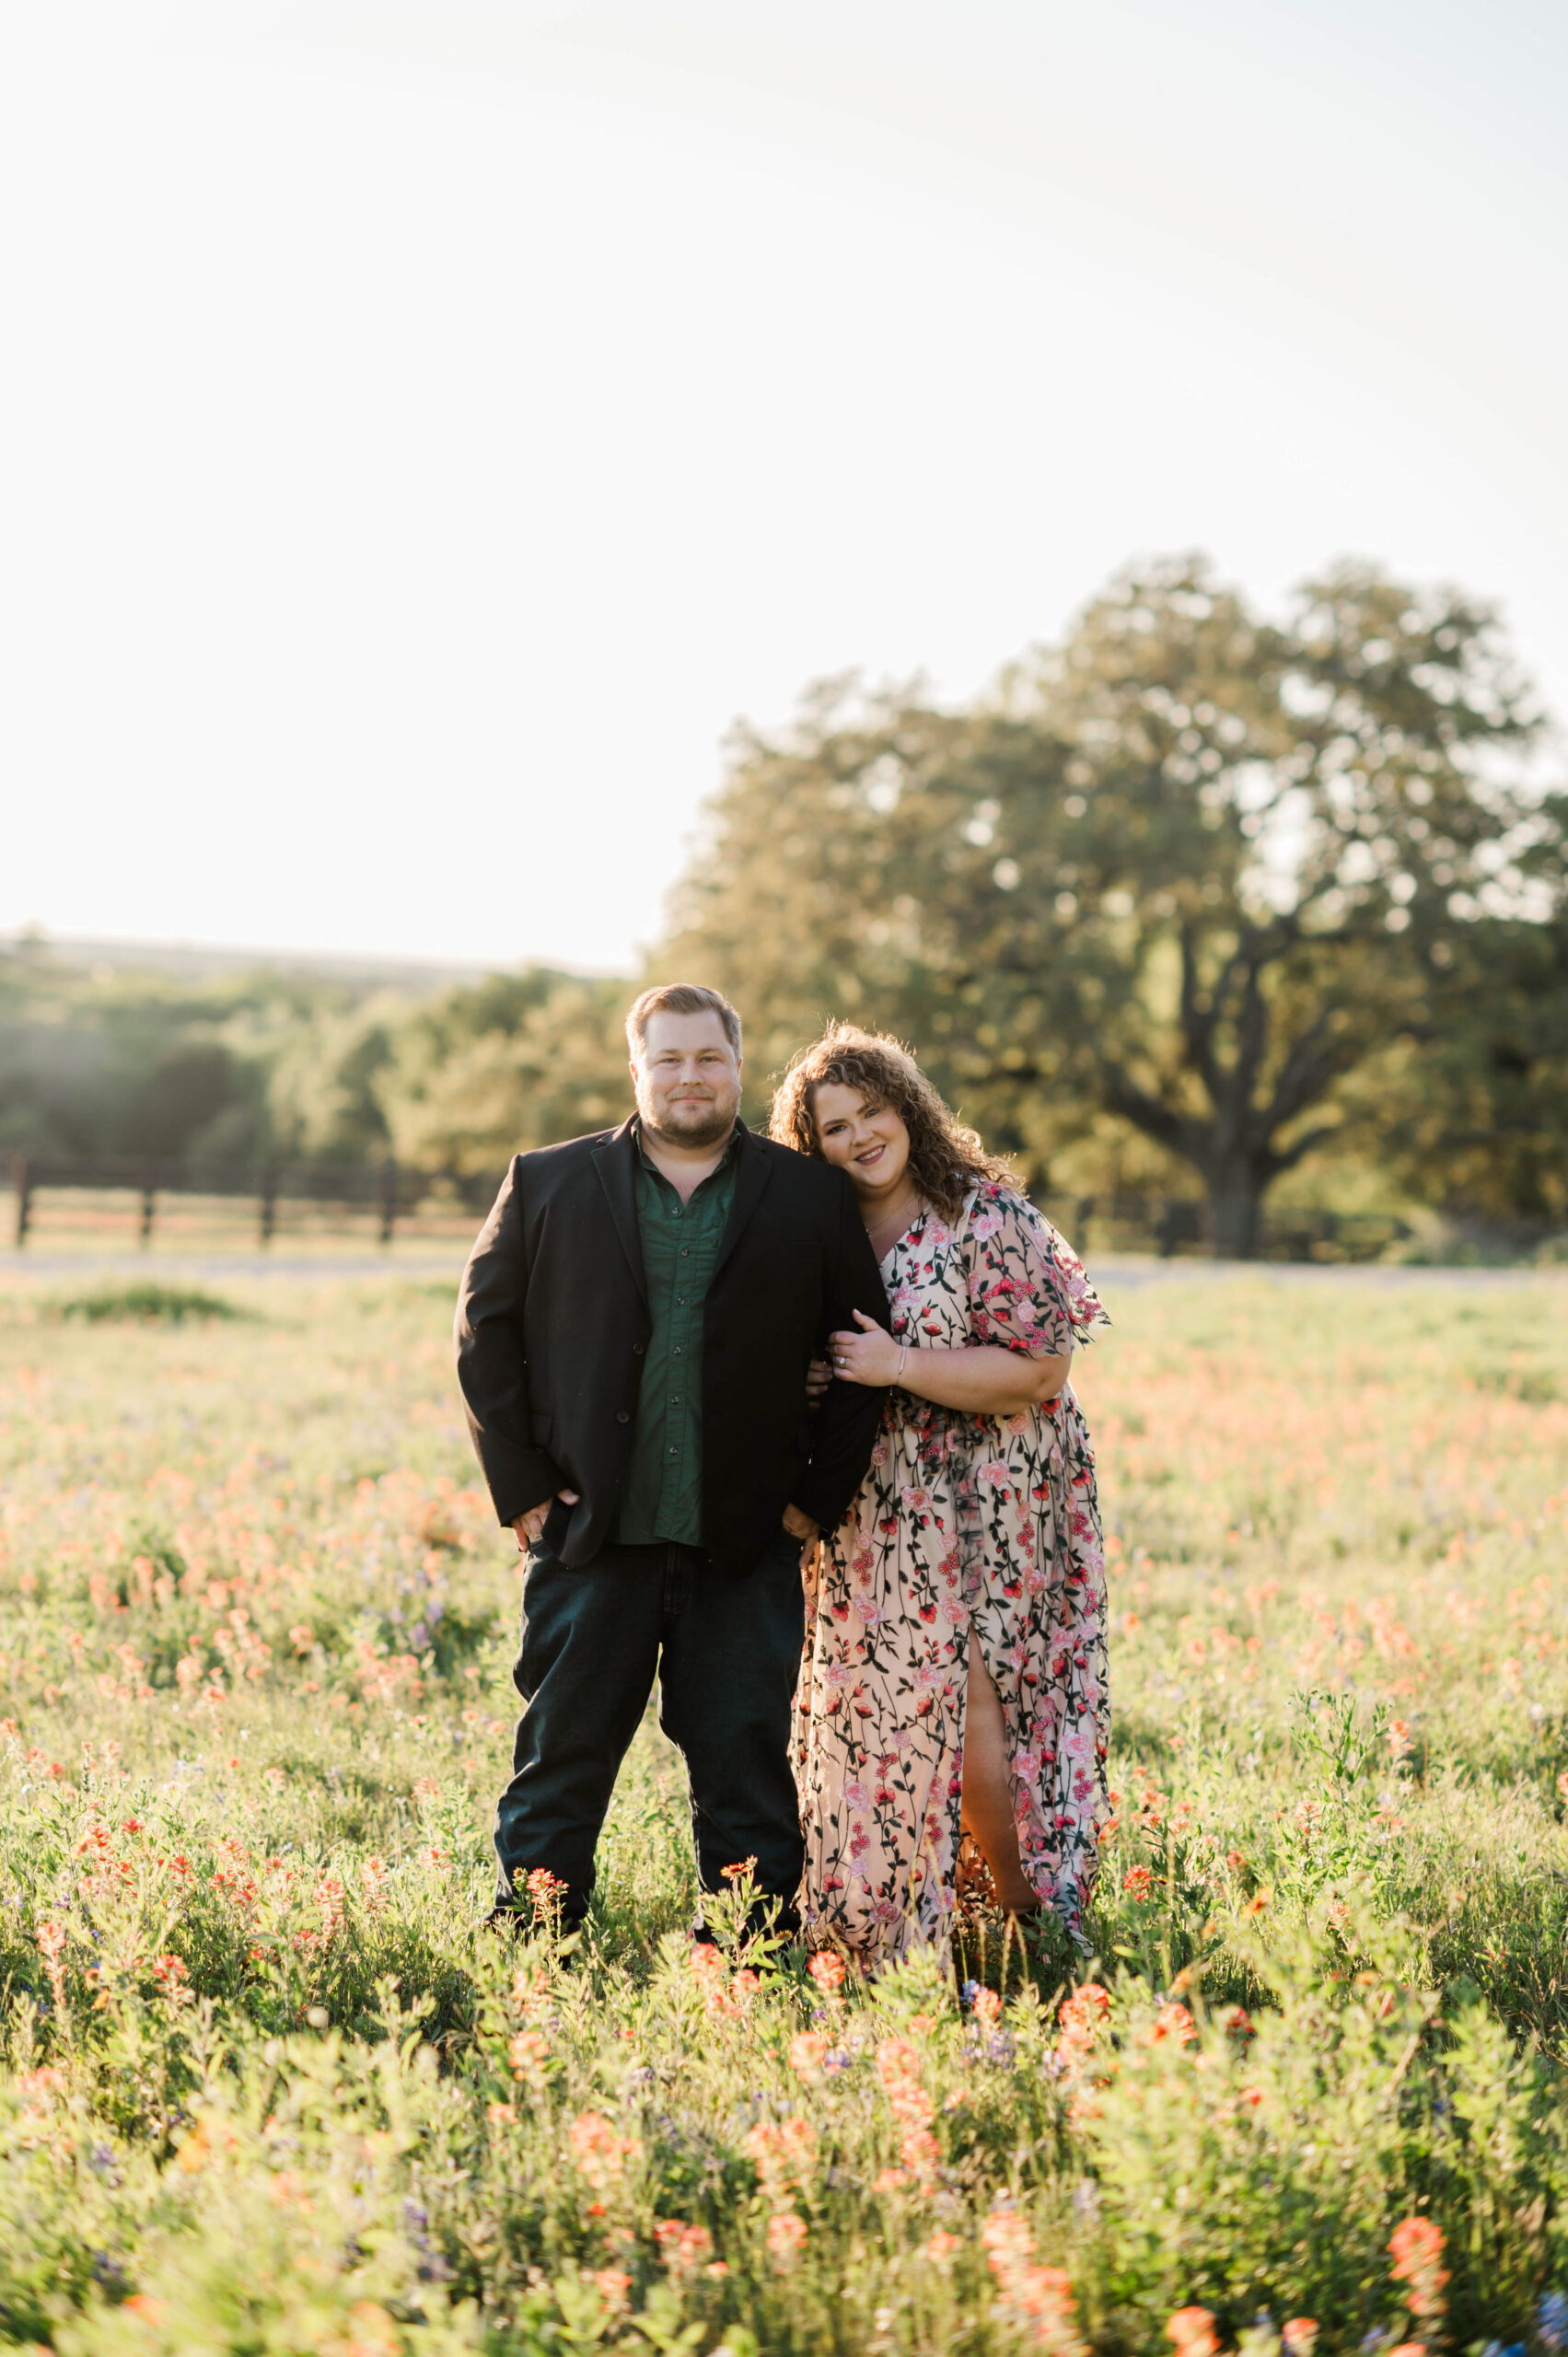 Pam and Kaleb's Engagement Session at Old Baylor Park and Downtown Brenham, Texas with Rachel Driskell Photography